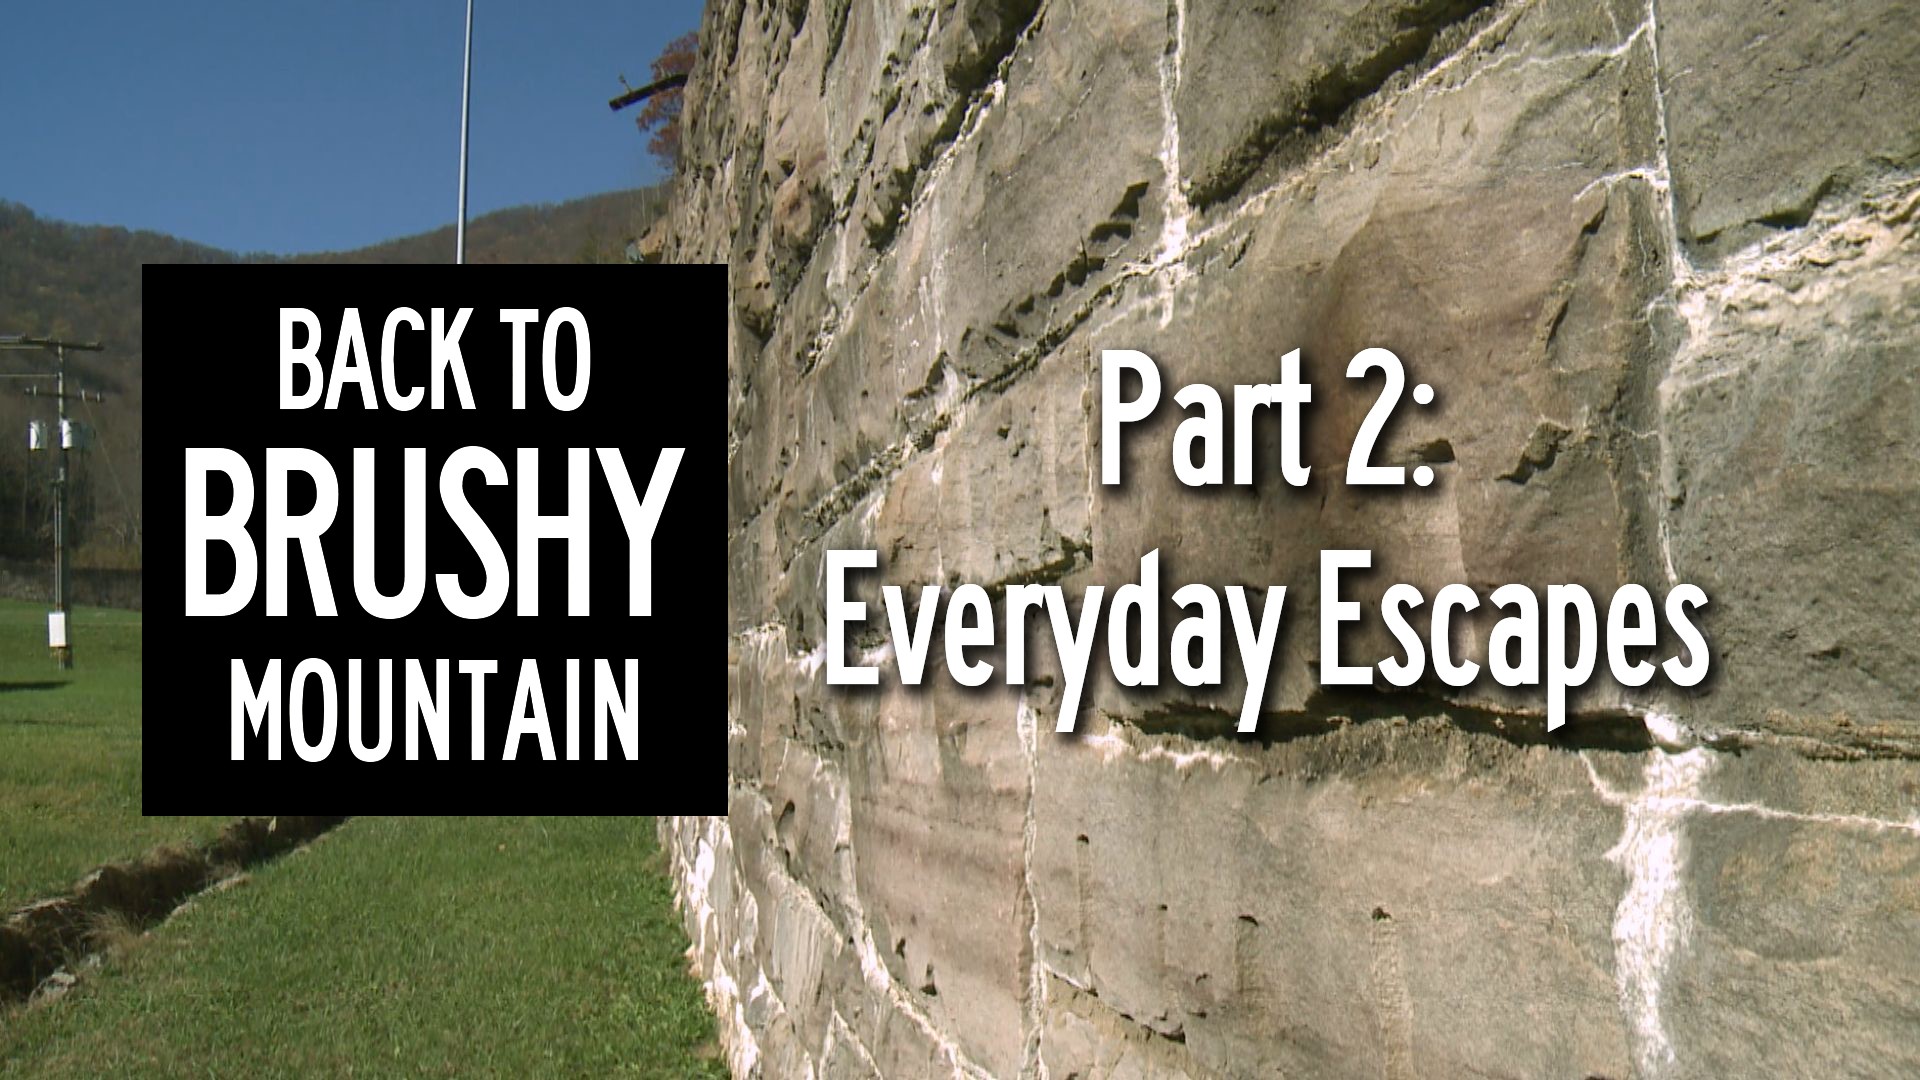 (Video, May 8, 2018) Part 2 of Back to Brushy Mountain reviews the countless escapes, comical and disconcerting, during the prison's 113-year history.